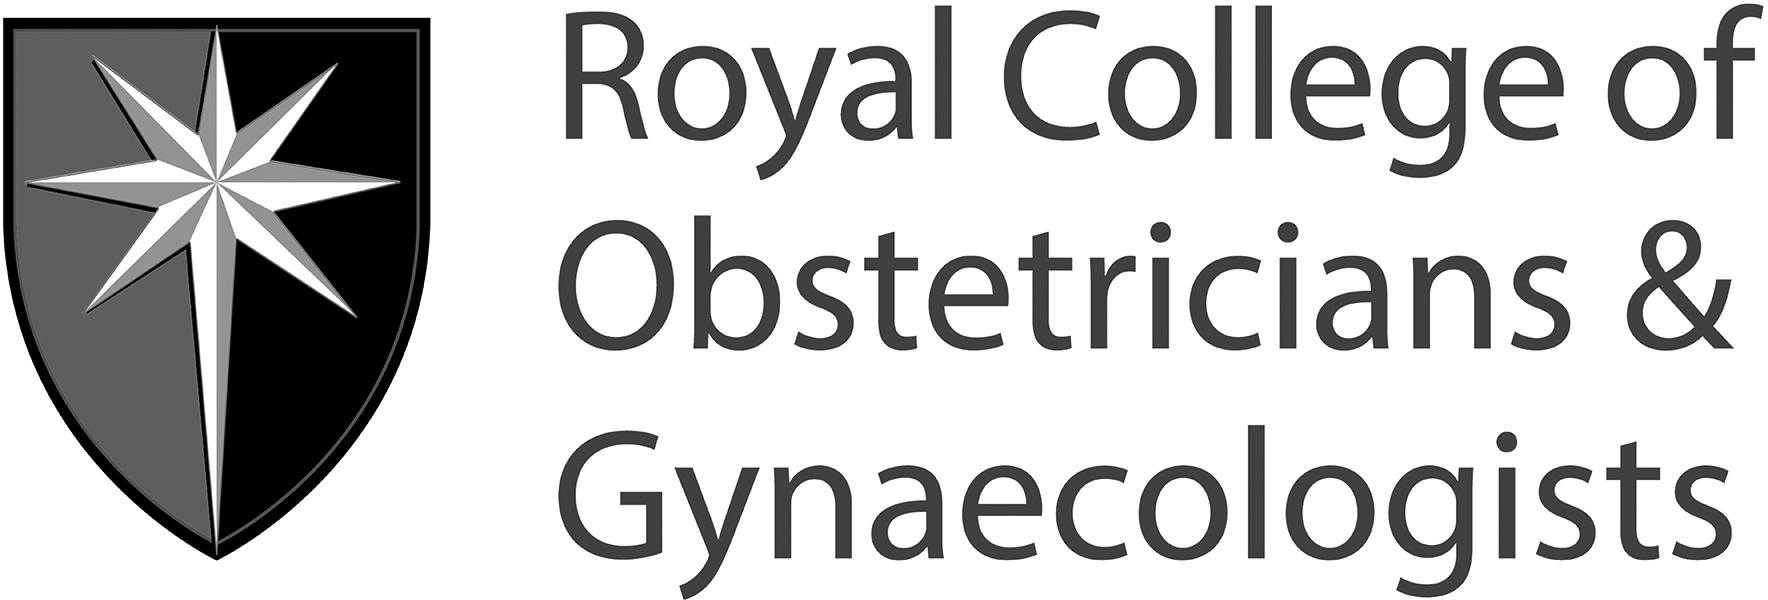 Royal College of Obstetricians & Gynaecologists (RCOG)